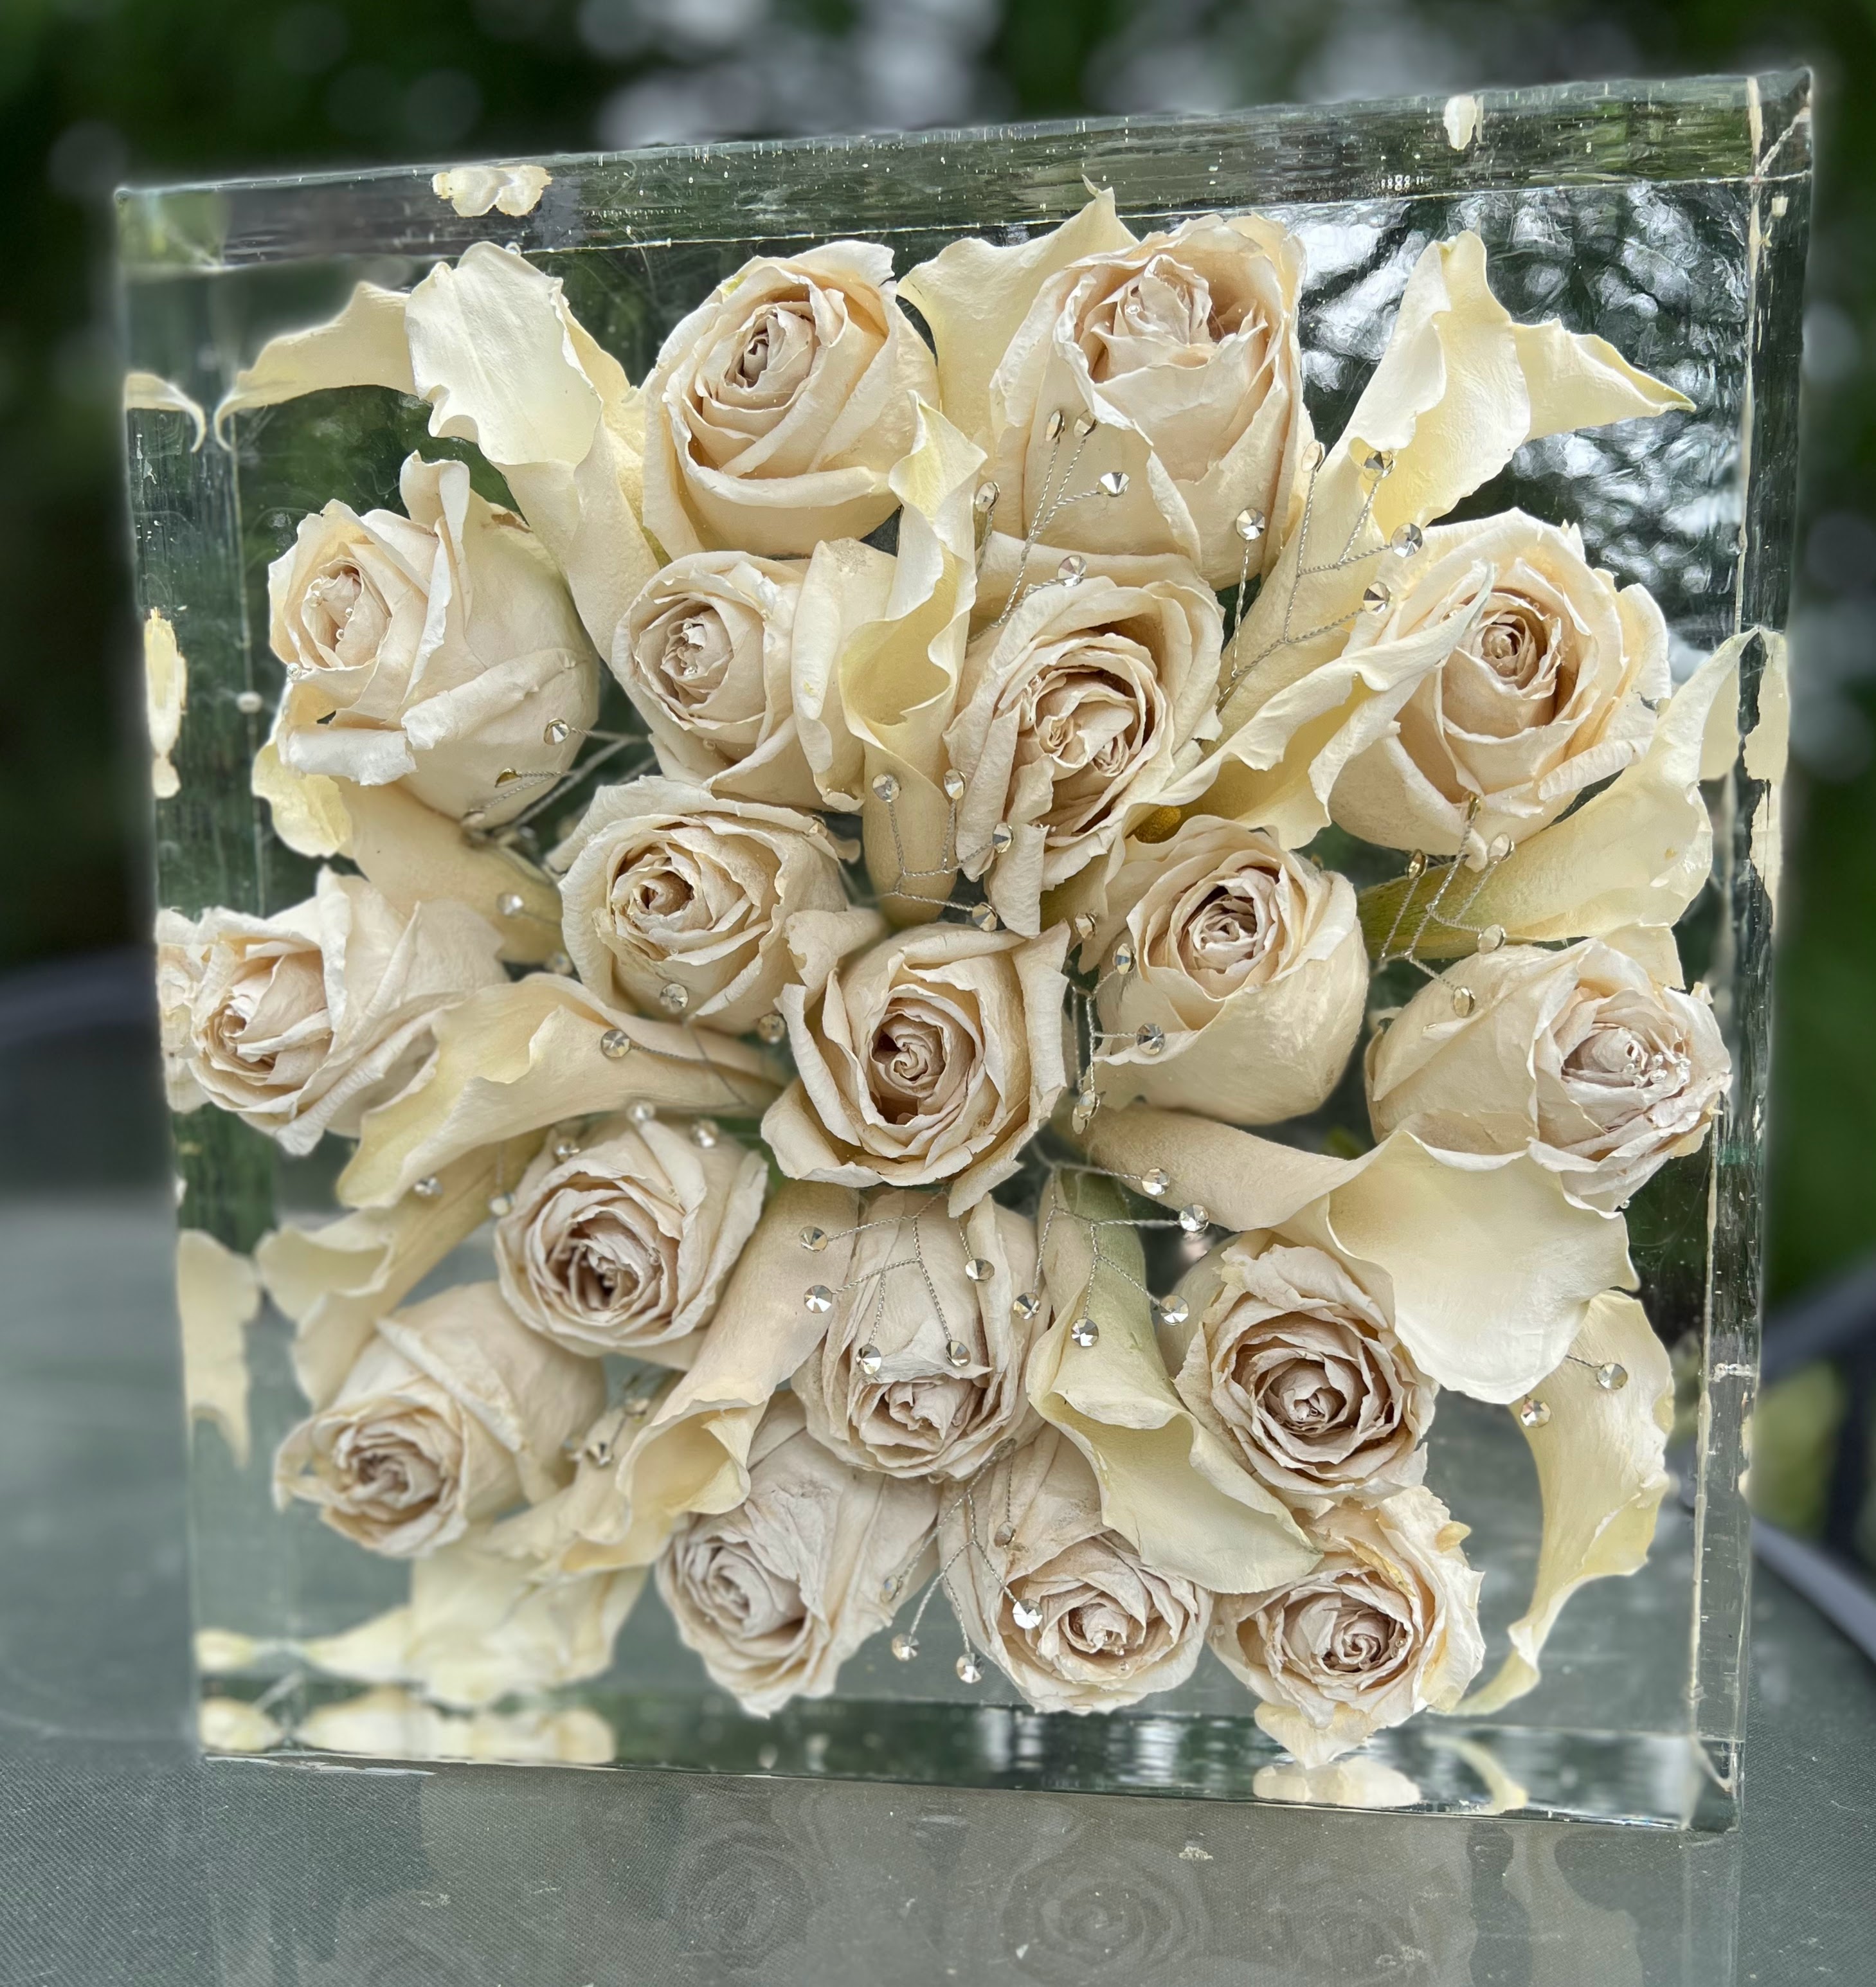 Wedding Bouquet Preservation: How to Preserve Your Wedding Flowers